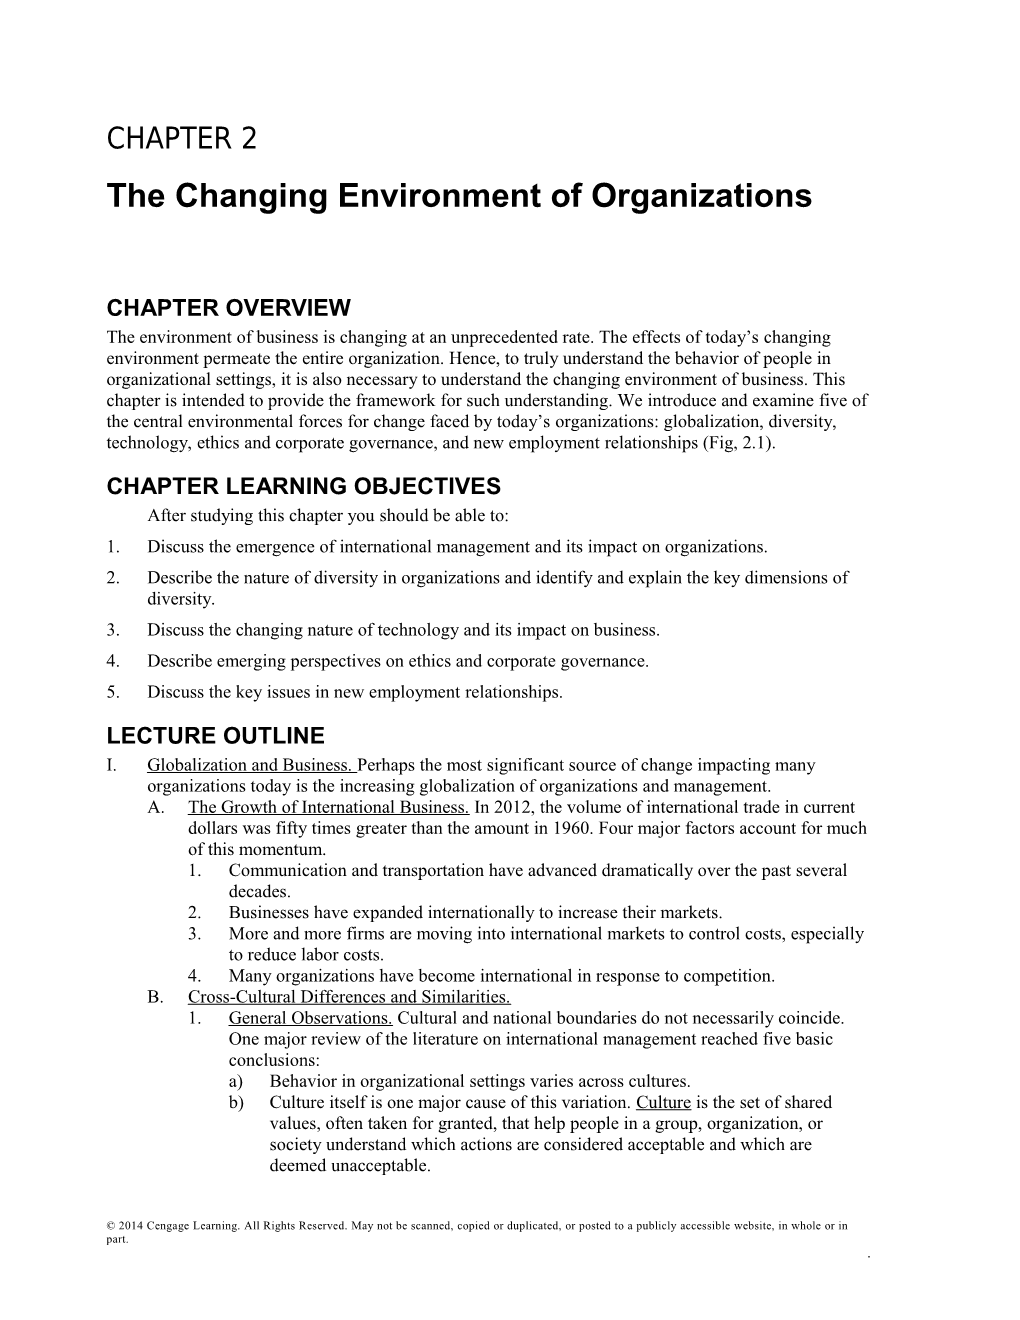 The Changing Environment of Organizations